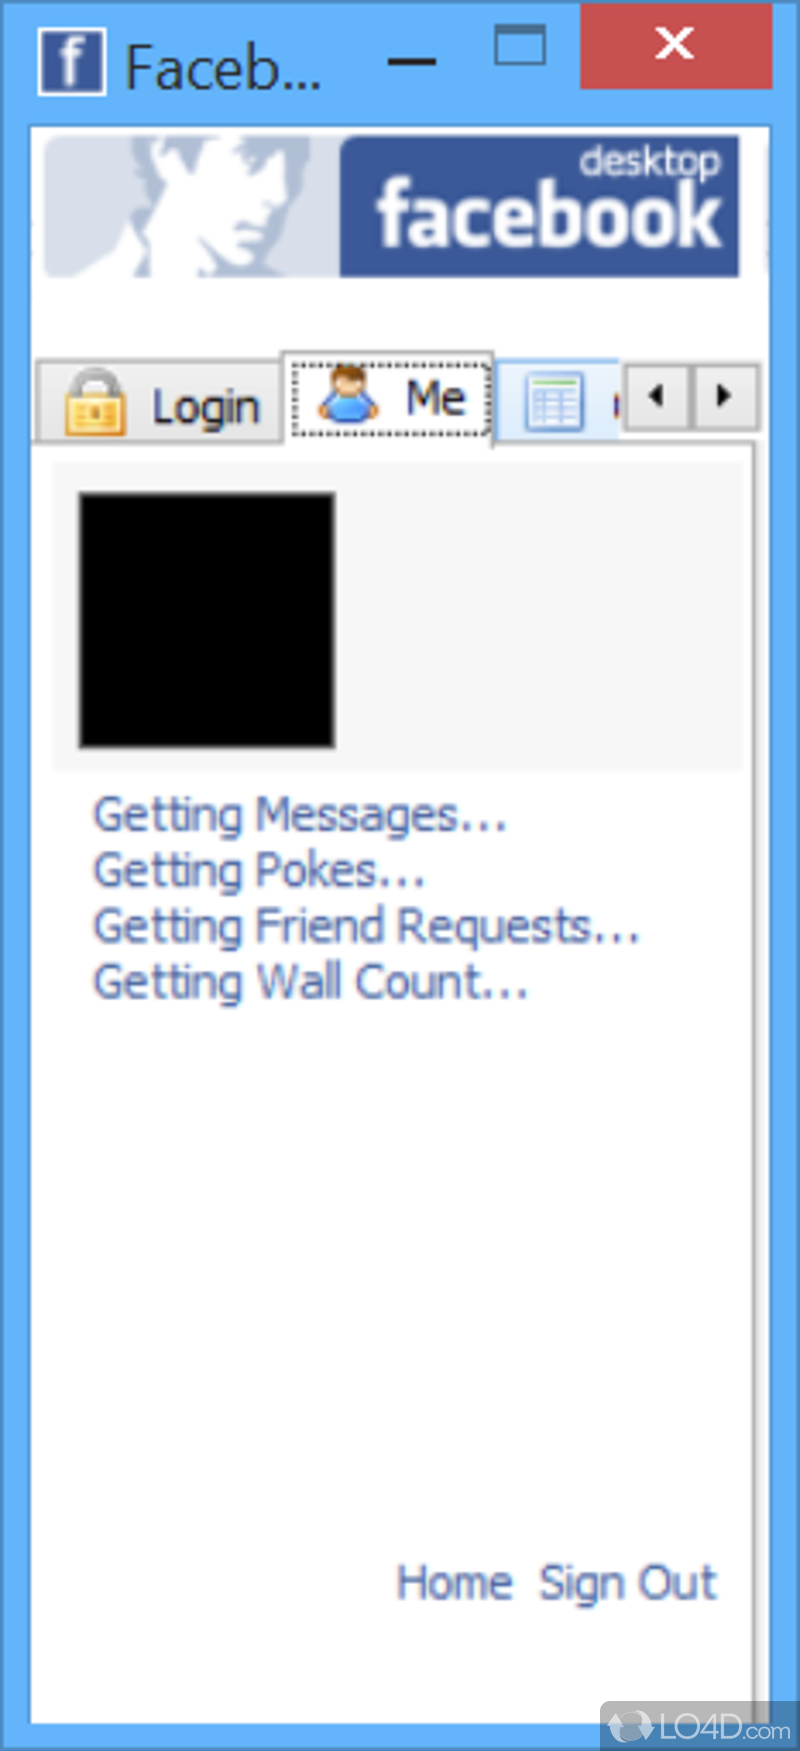 View notifications and chat with your online friends - Screenshot of Facebook Desktop